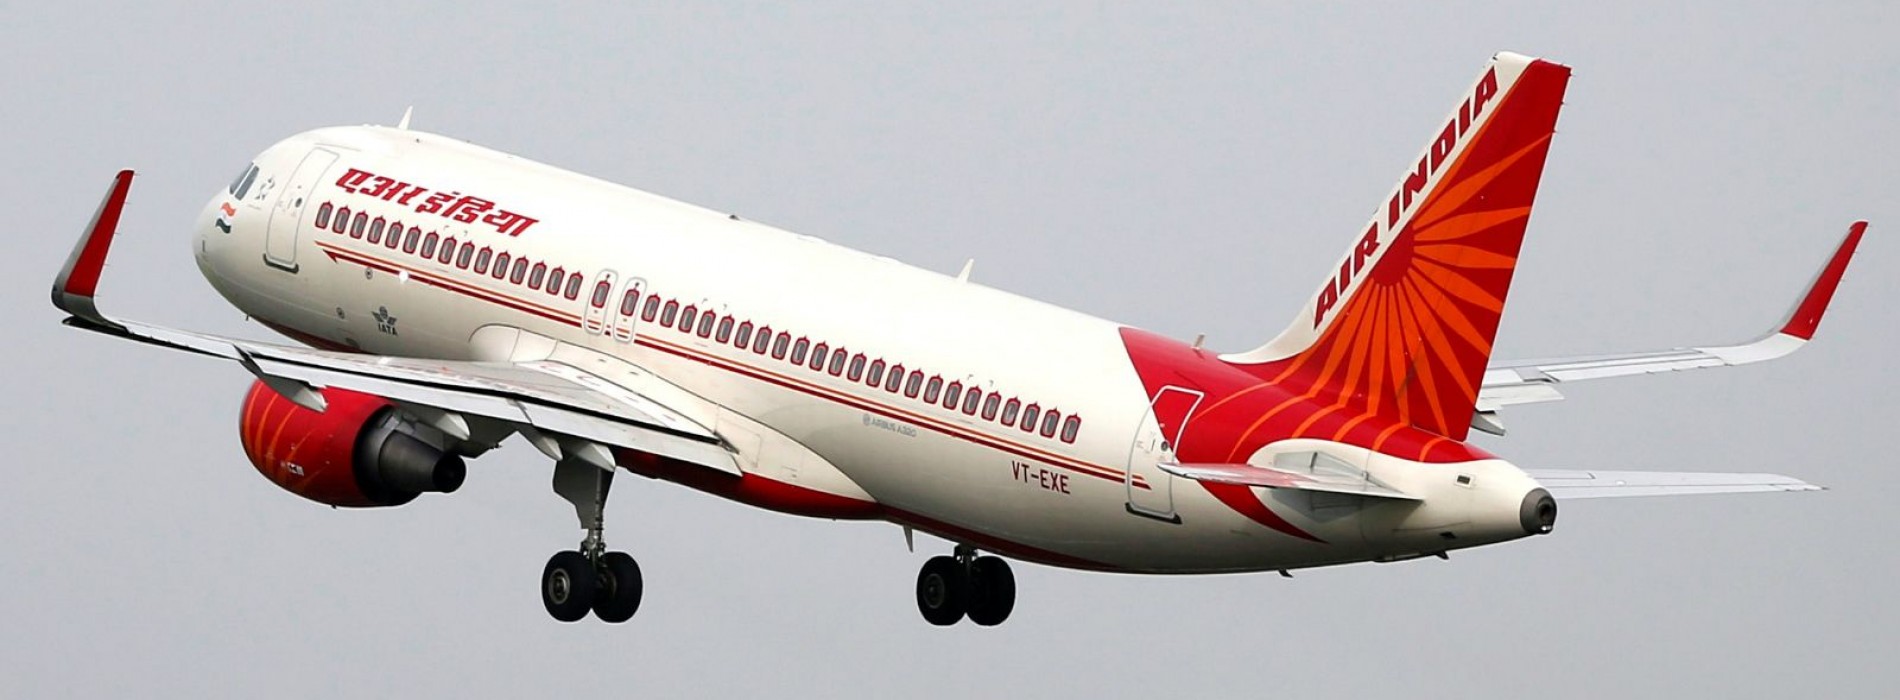 Air India’s trial flight lands successfully at Kannur Airport